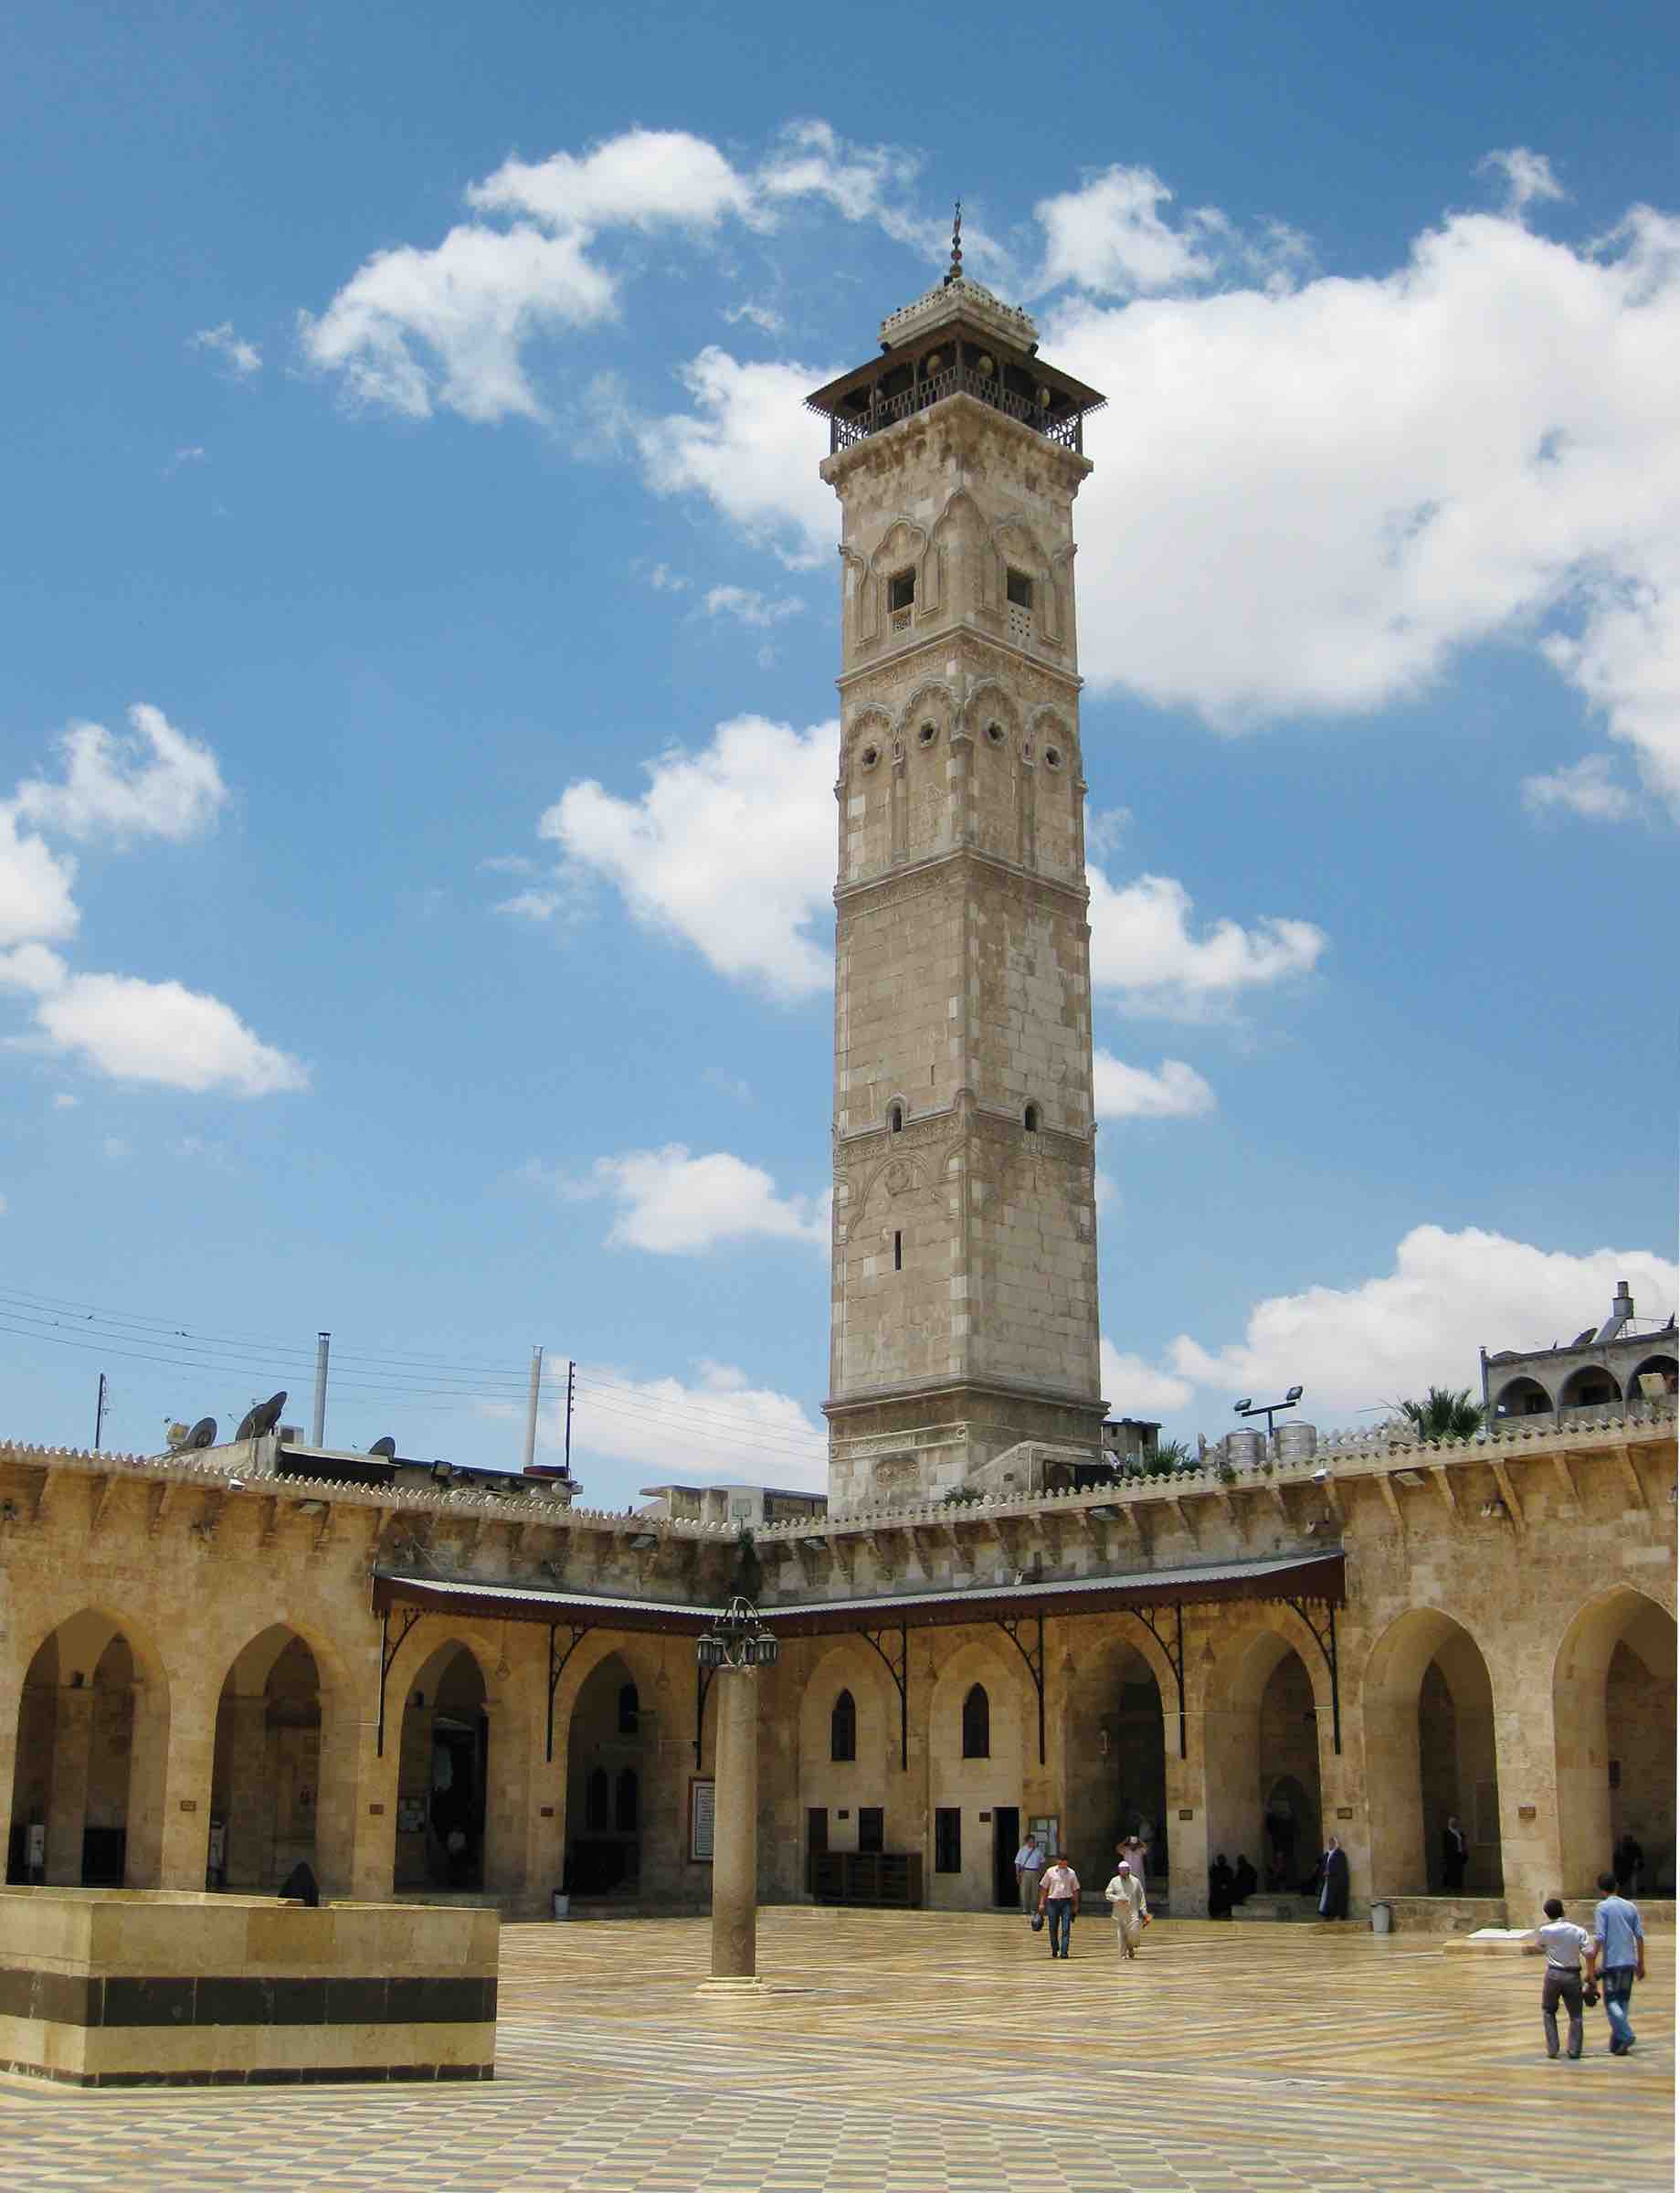 Umayyad Mosque, Aleppo before the Syrian Civil War